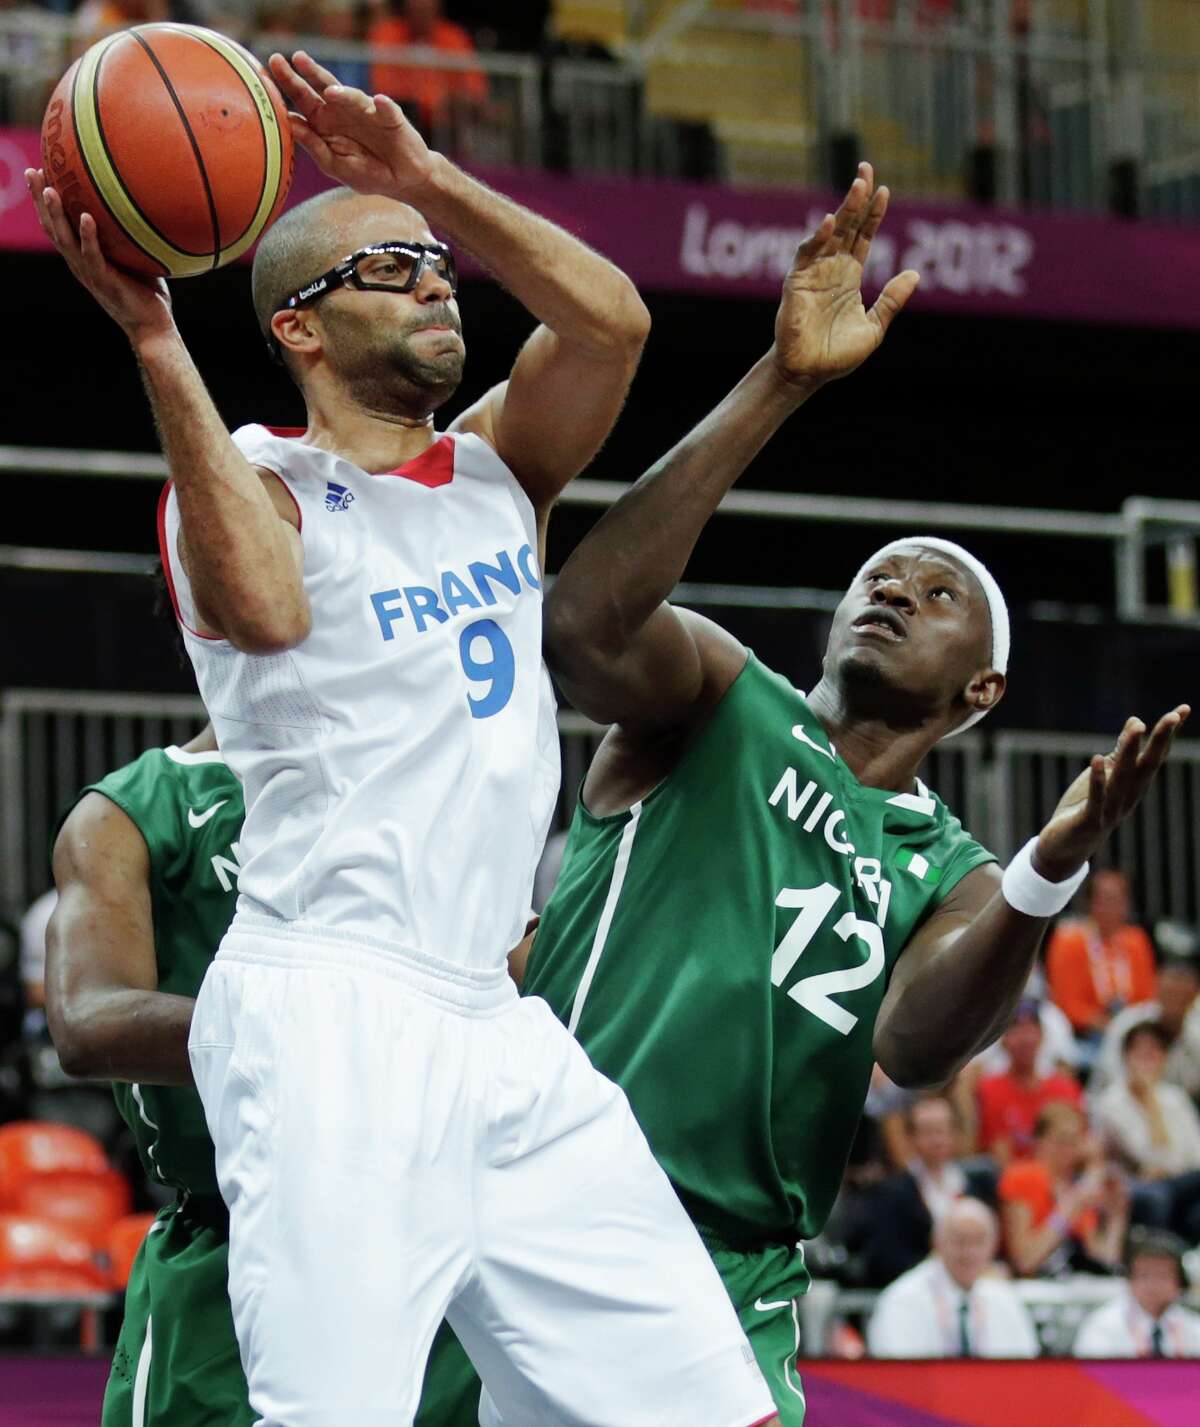 France's Tony Parker looks to pass while being defended by Nigeria's Ejike Ugboaja during a men's basketball game at the 2012 Summer Olympics, Monday, Aug. 6, 2012, in London. (AP Photo/Charles Krupa)